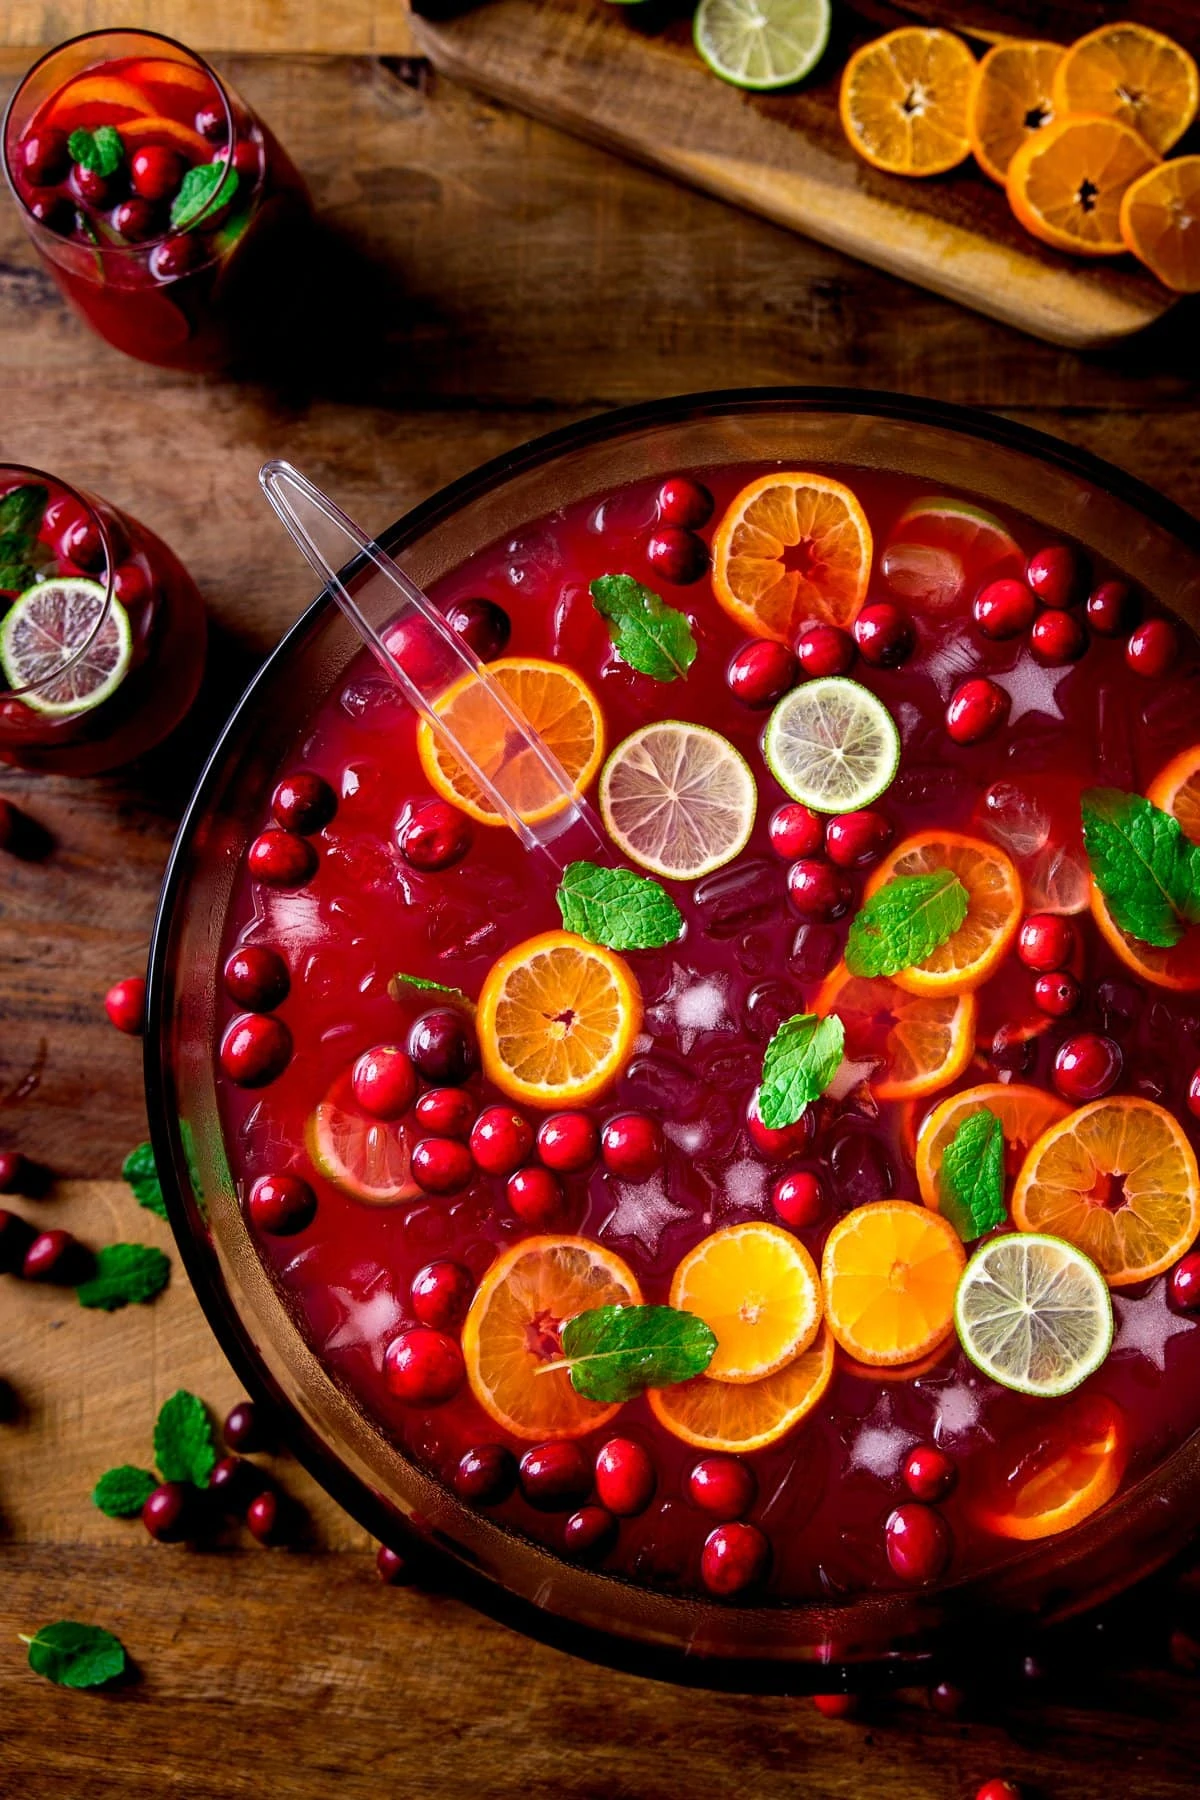 Festive Punch in a bowl on a wooden table. Punch is topped with slices of citrus fruits and cranberries